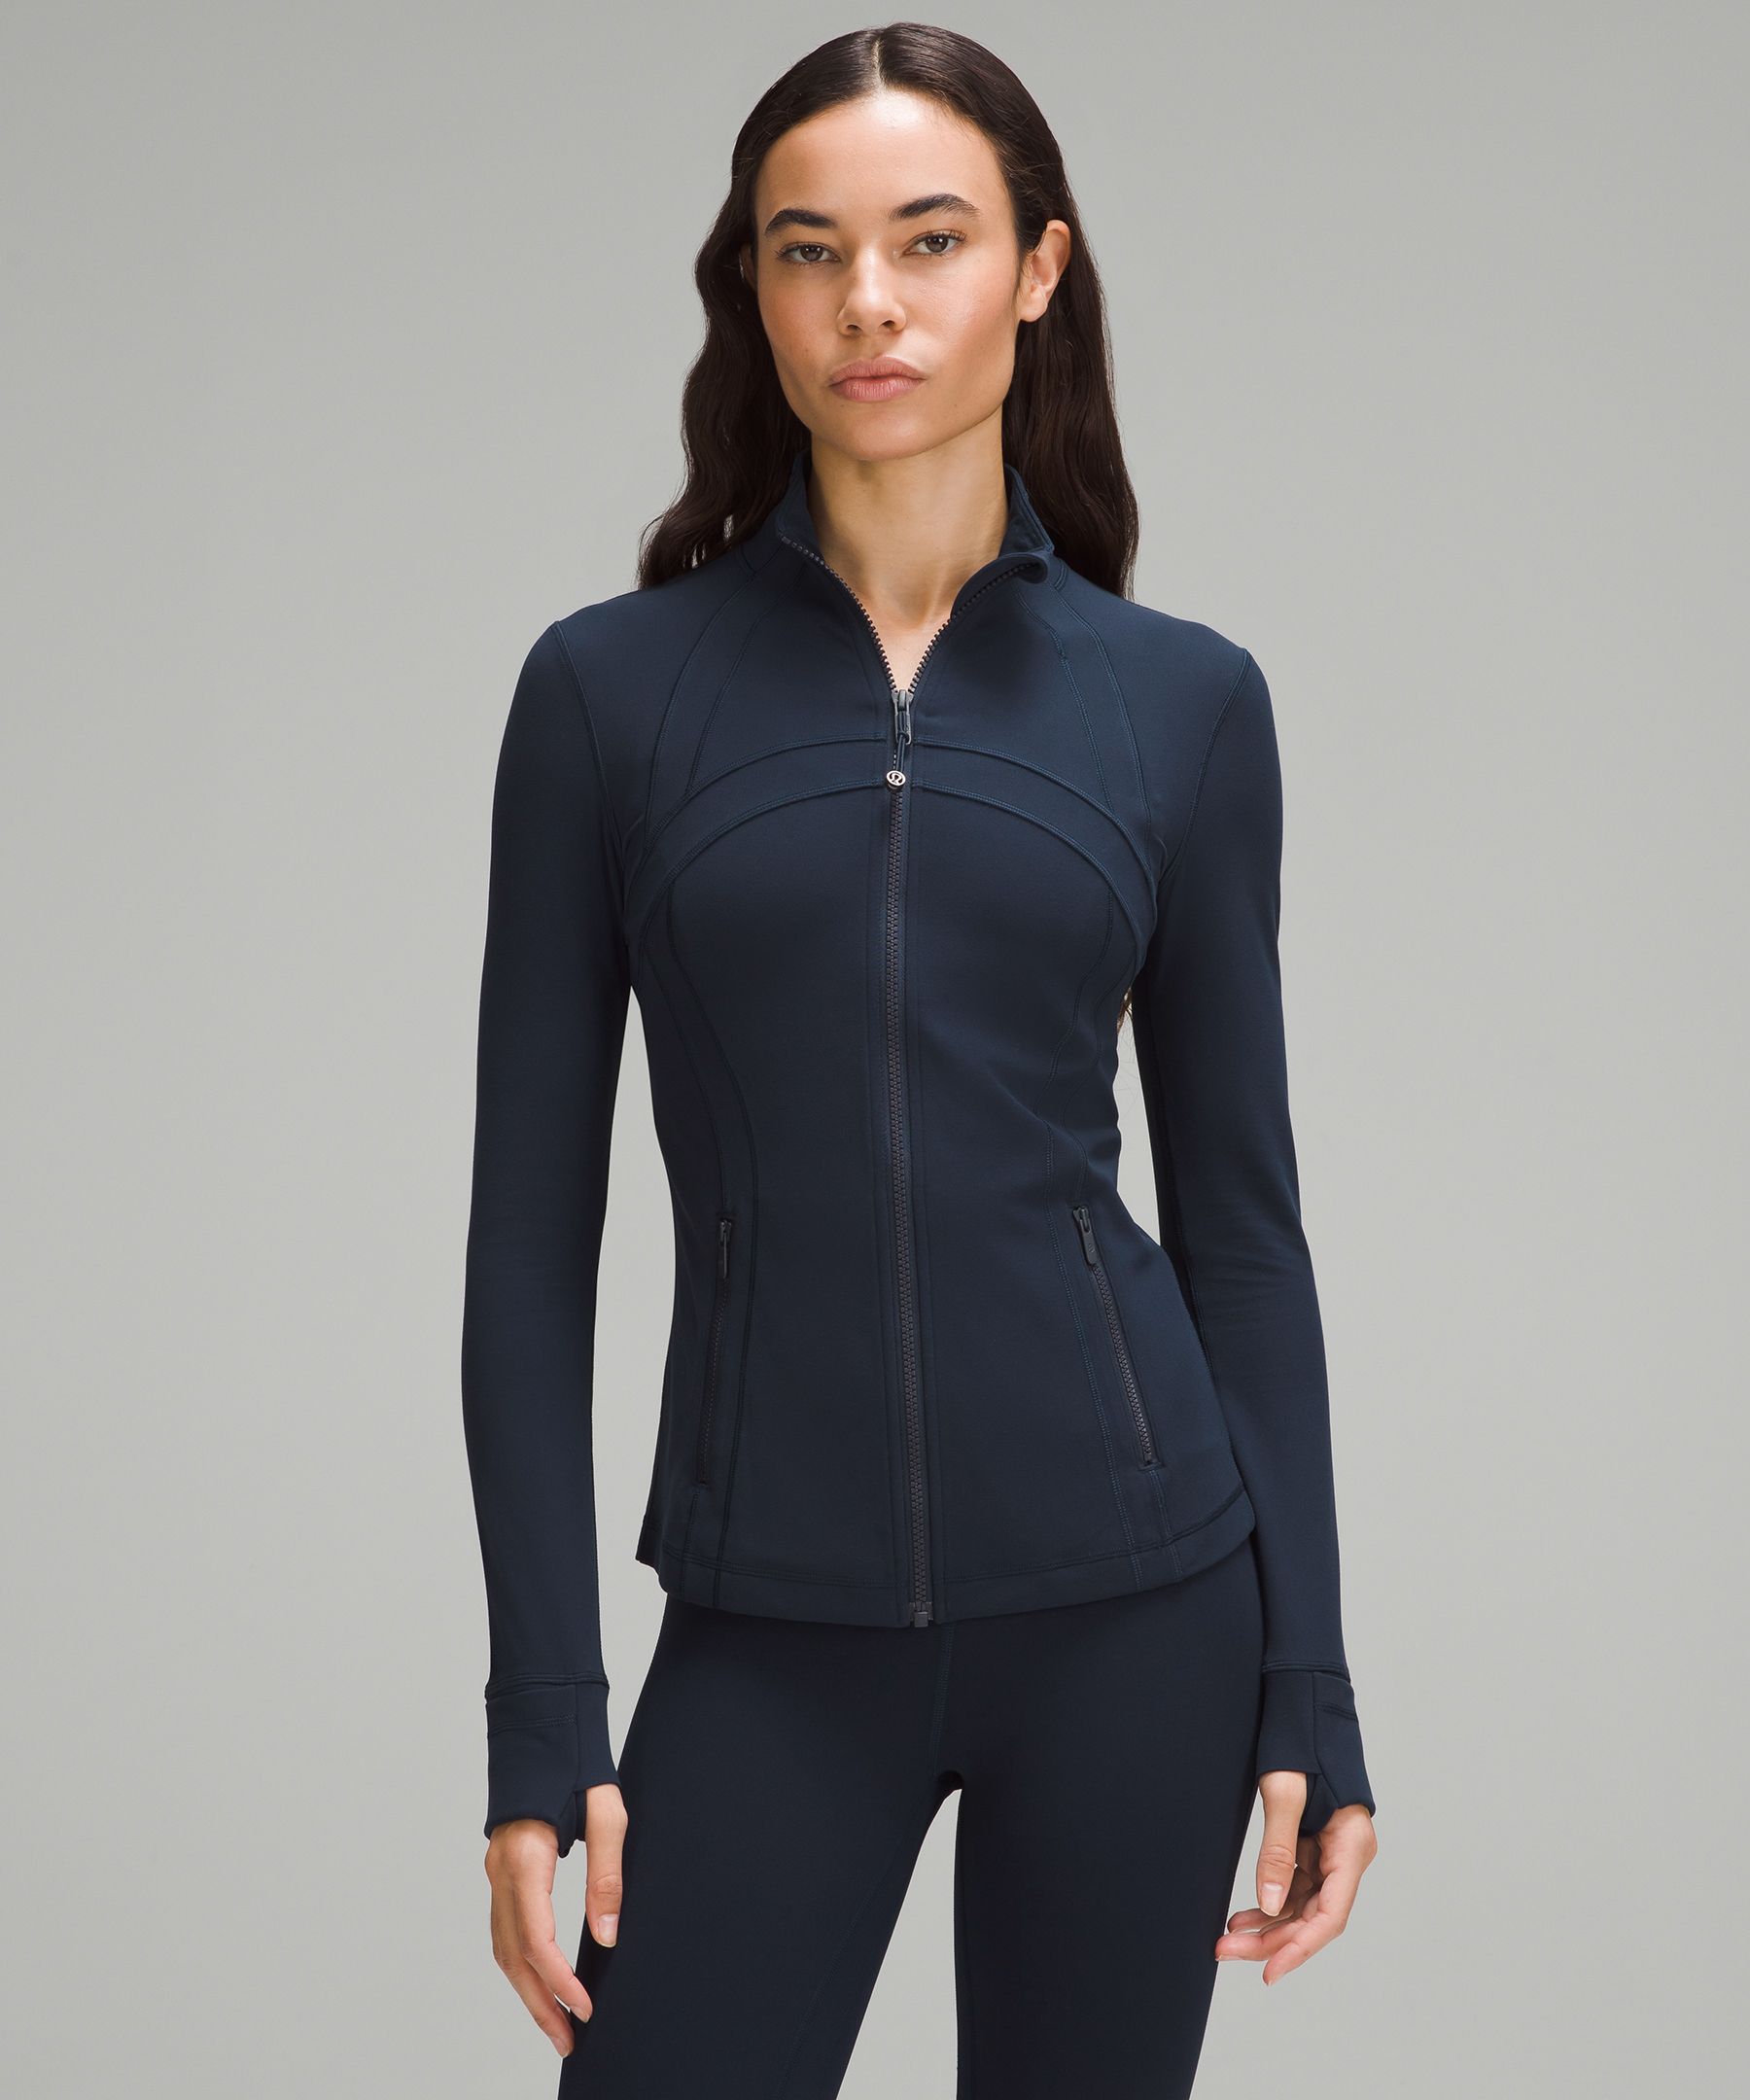 Define jacket Luon in size 2! Opinions on the fit? I'm a little worried  it's too small : r/lululemon